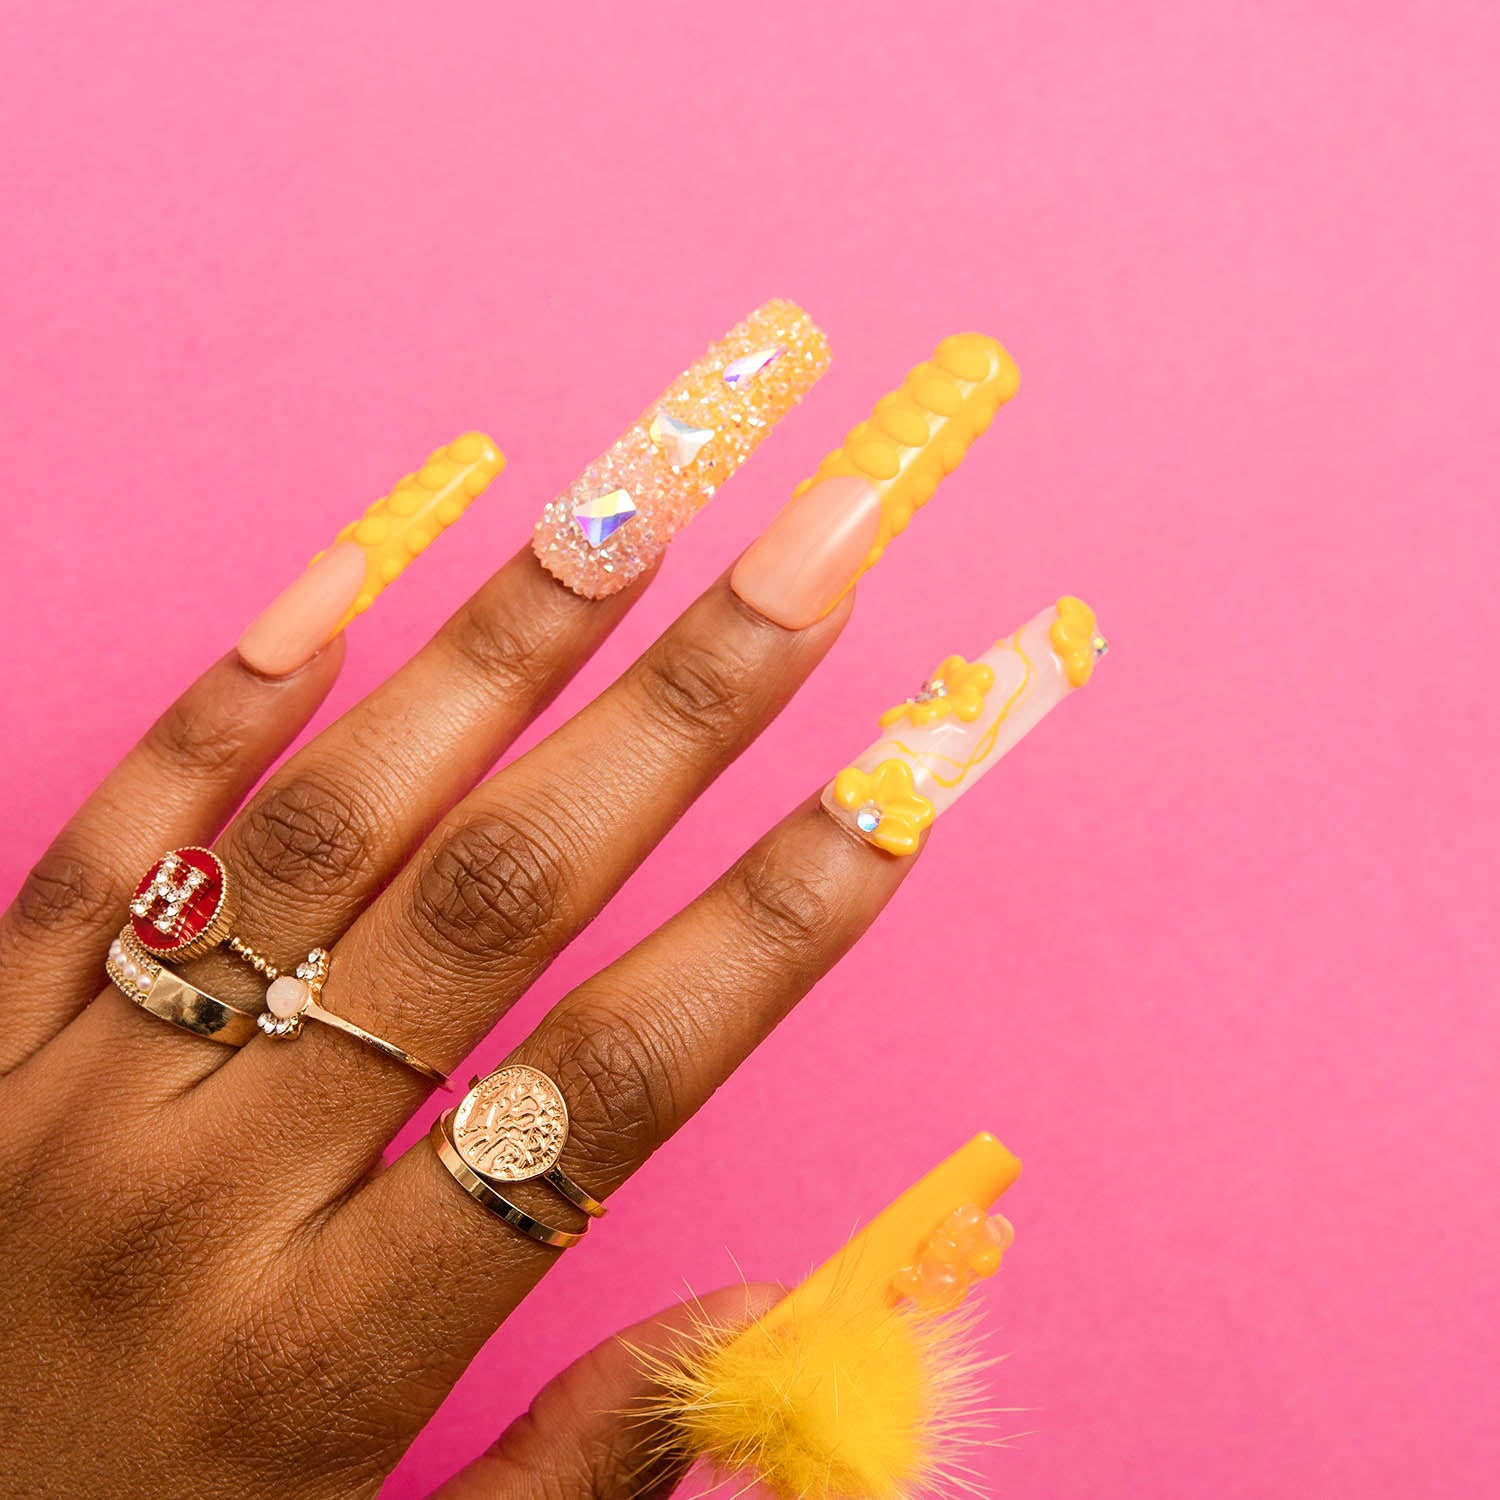 Hand with long yellow square-shaped press-on nails featuring beadwork, glitter, and detachable fluffy balls, set against a vibrant pink background